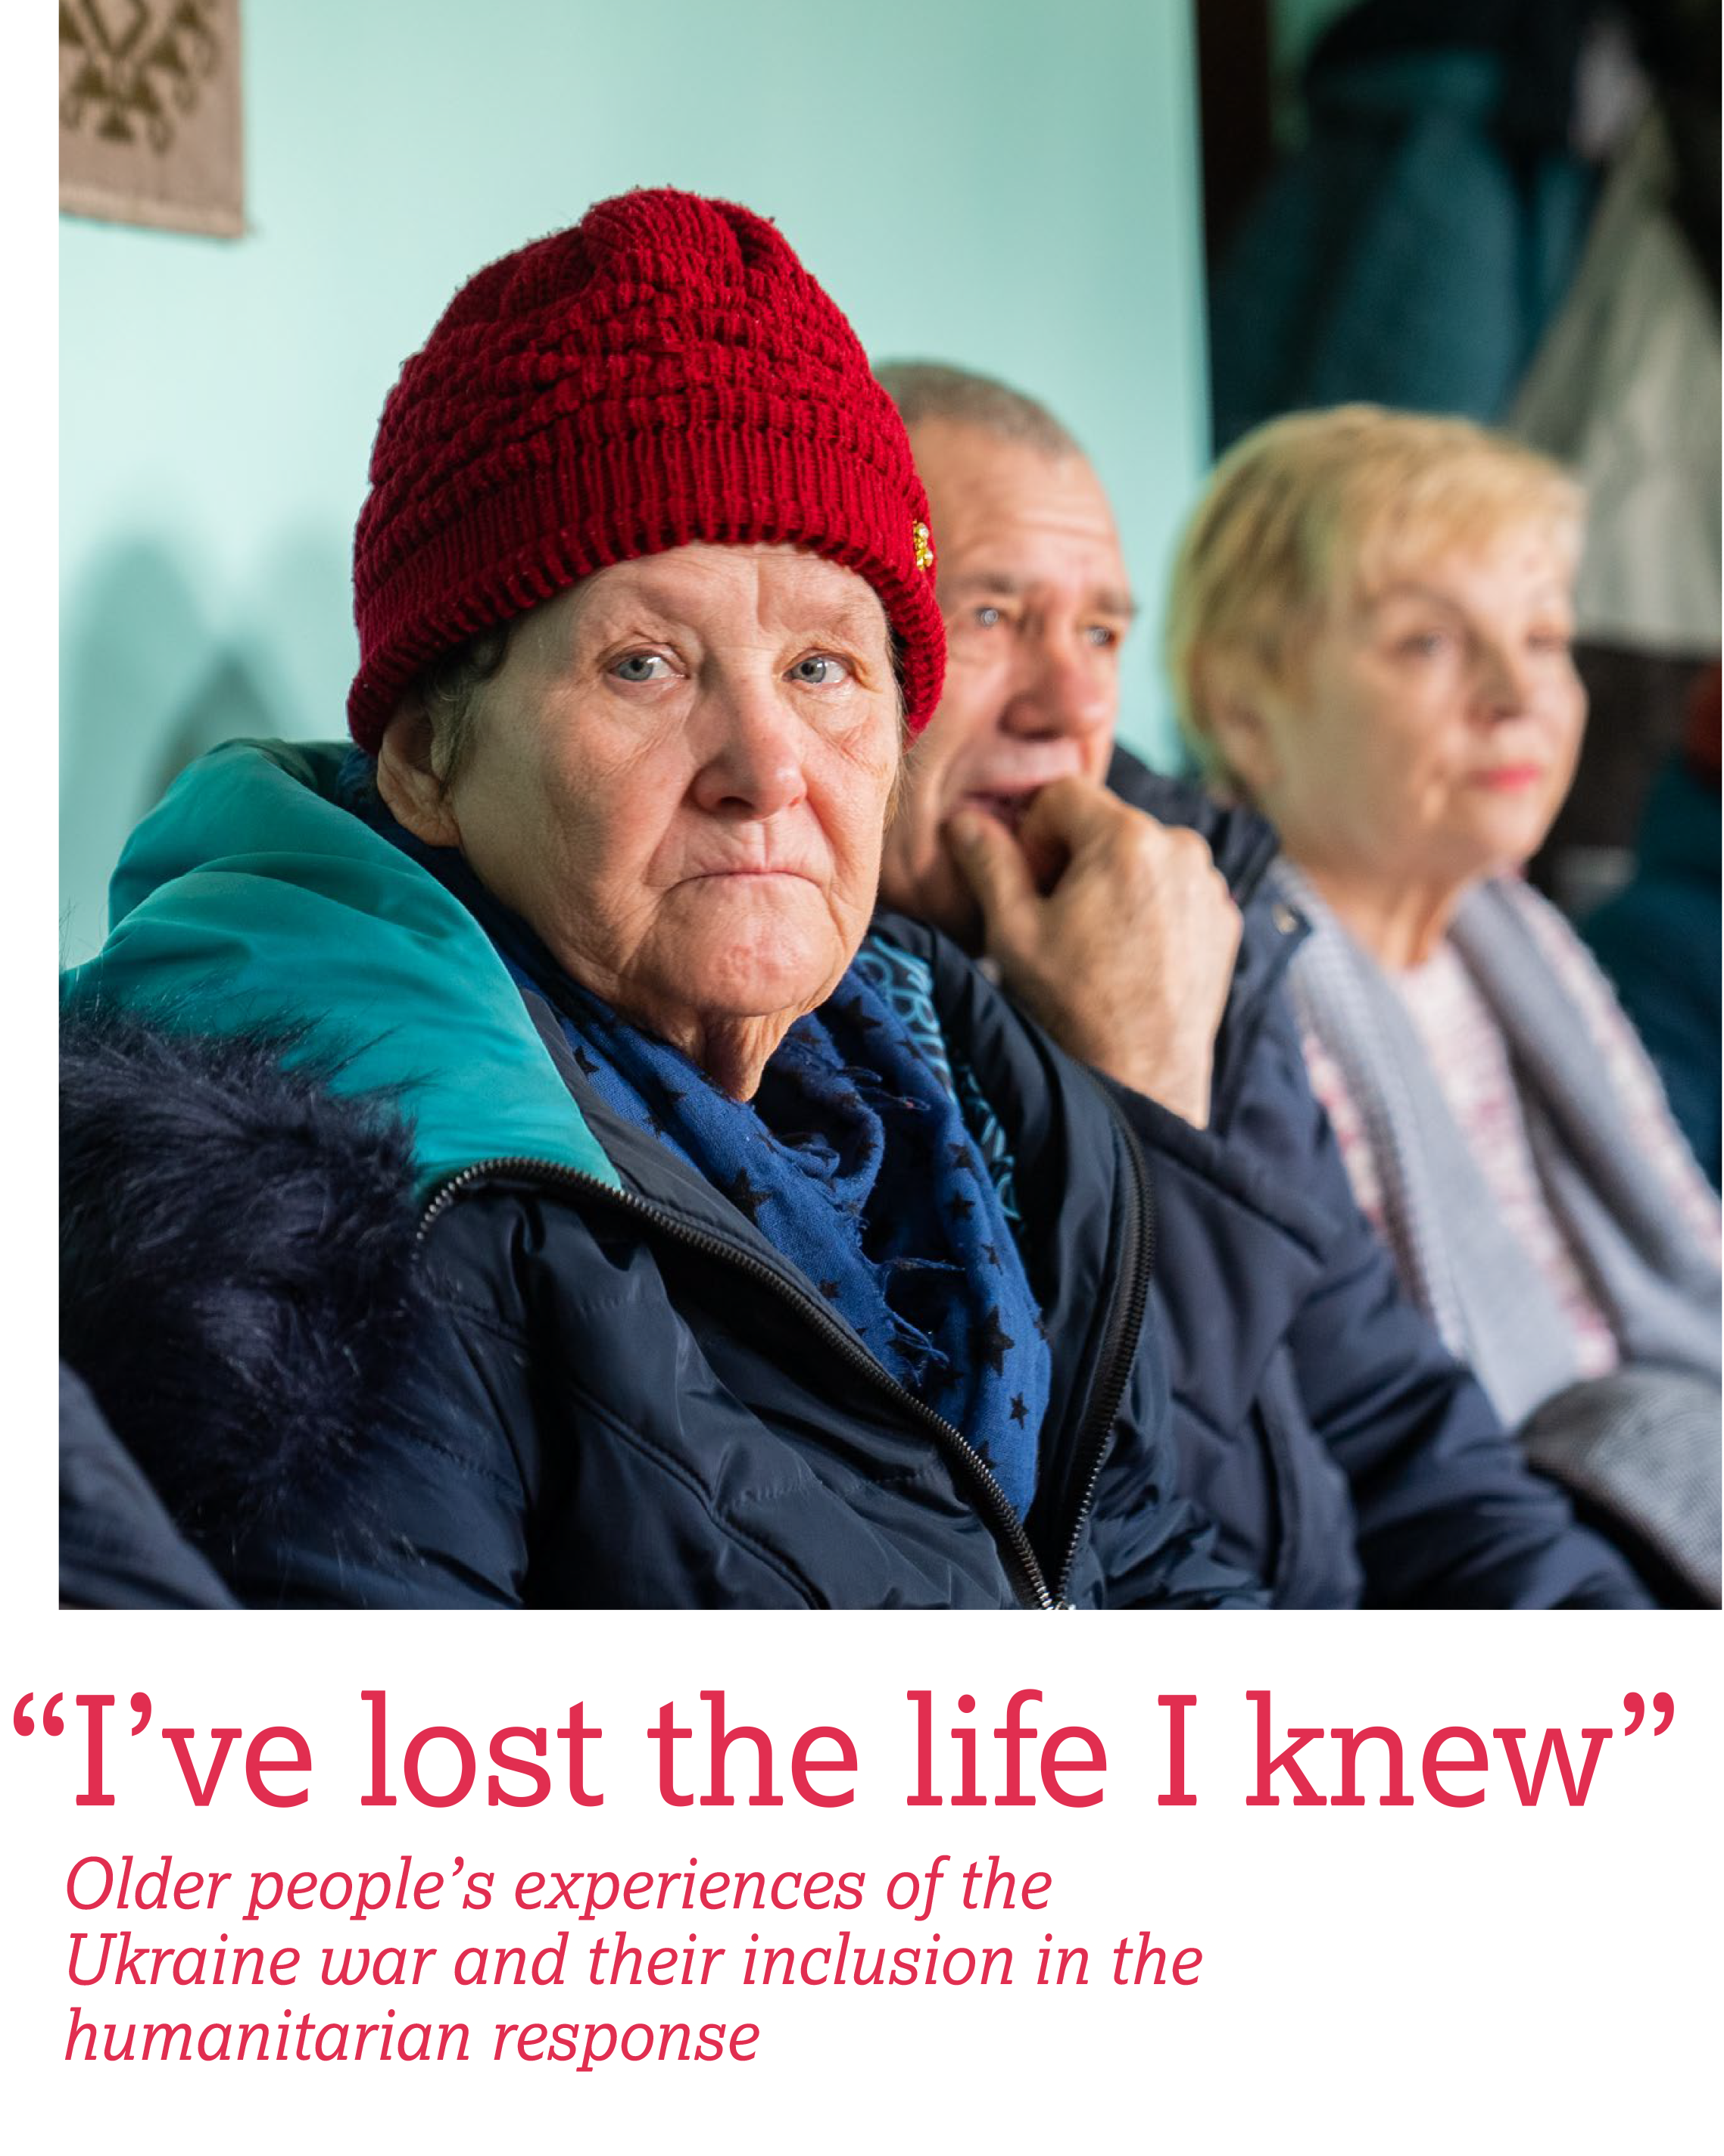  _2_https://www.helpage.org/silo/images/cover-reporti-ve-lost-the-life-i-knew_2277x2847.png